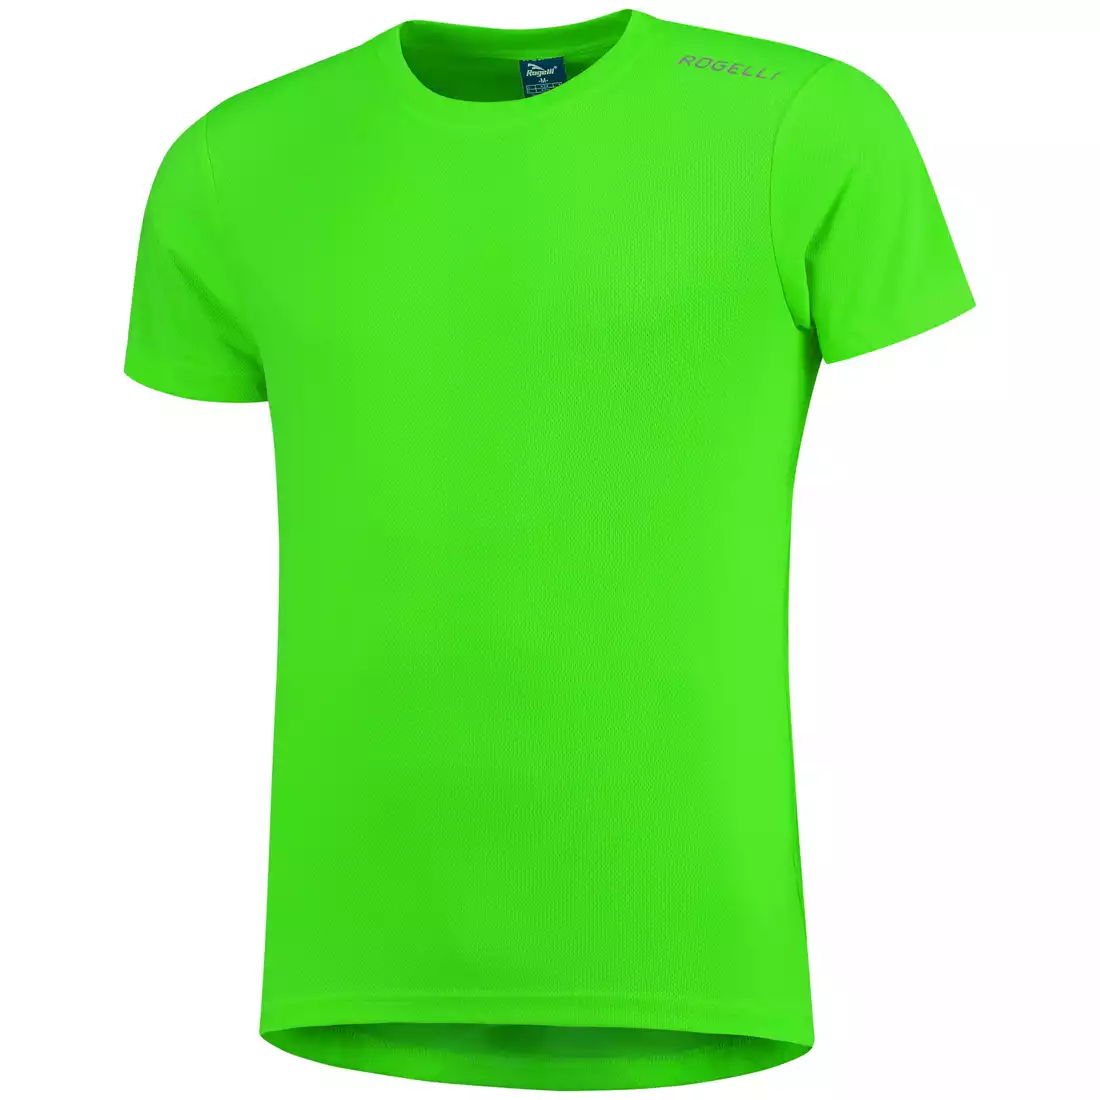 ROGELLI PROMOTION Sports t-shirt for children, fluo-green